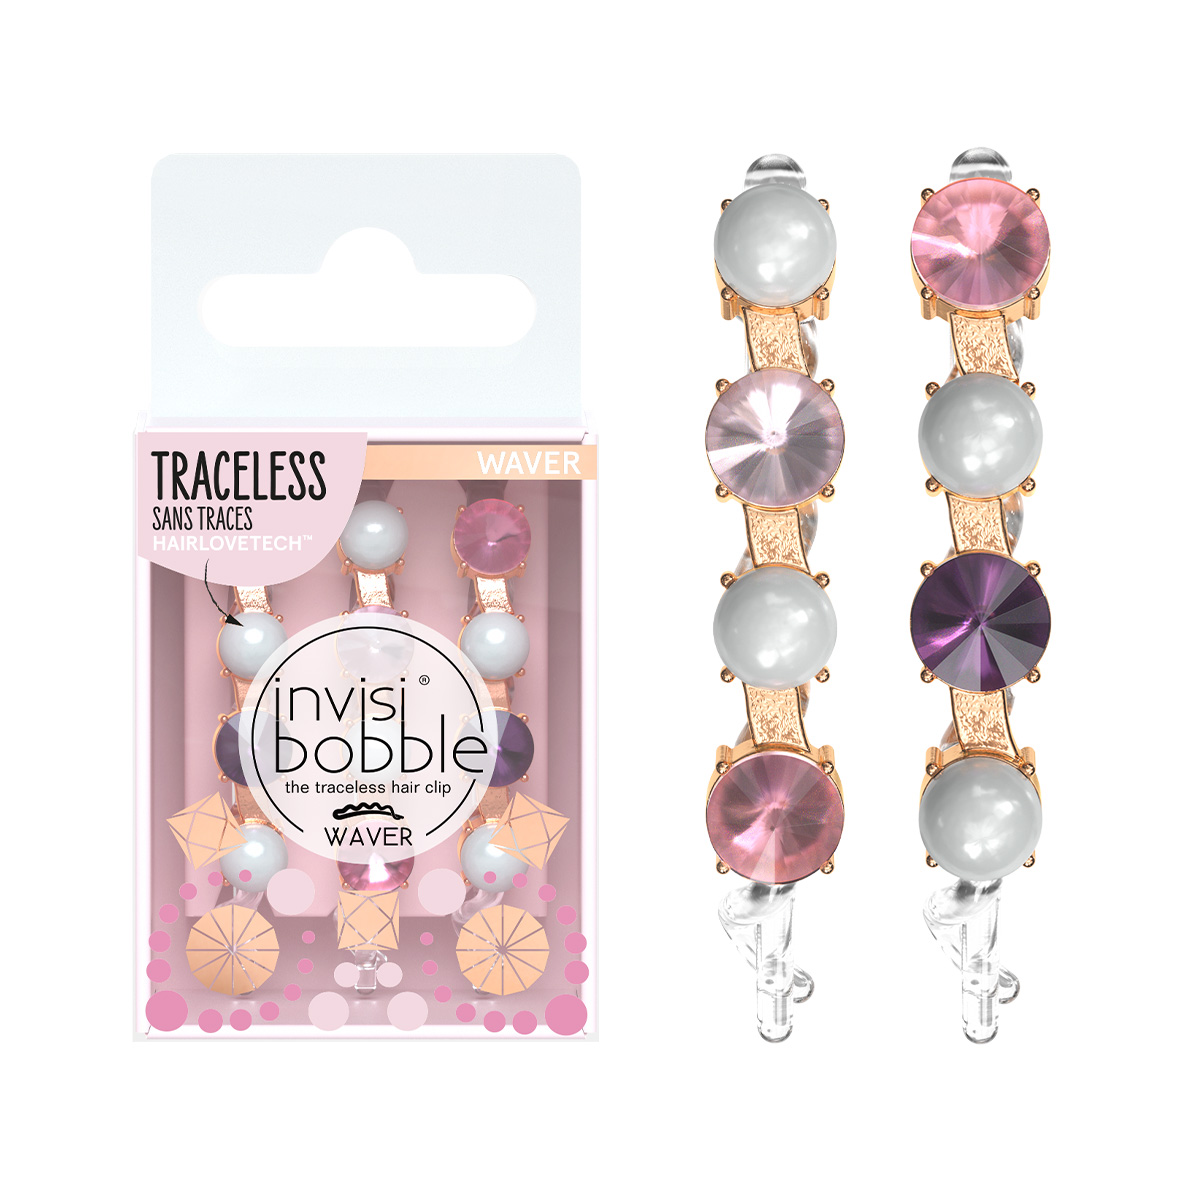 INVISIBOBBLE Заколка для волос / invisibobble WAVER British Royal To Bead or not to Bead the british cookbook